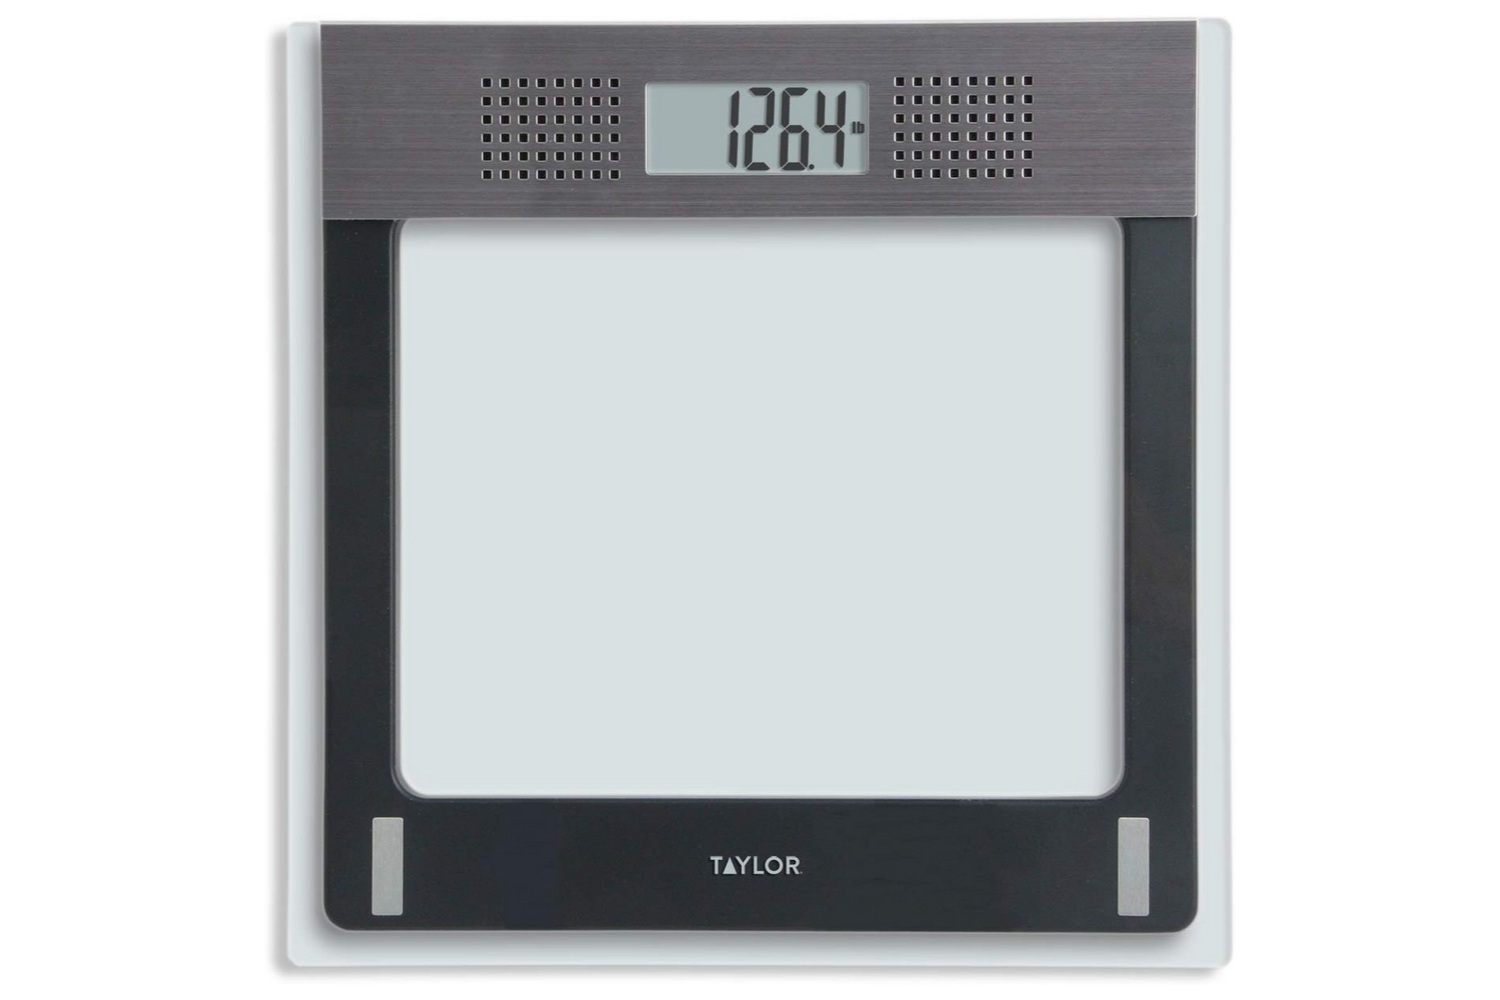 Taylor Electronic Glass Talking Bathroom Scale 